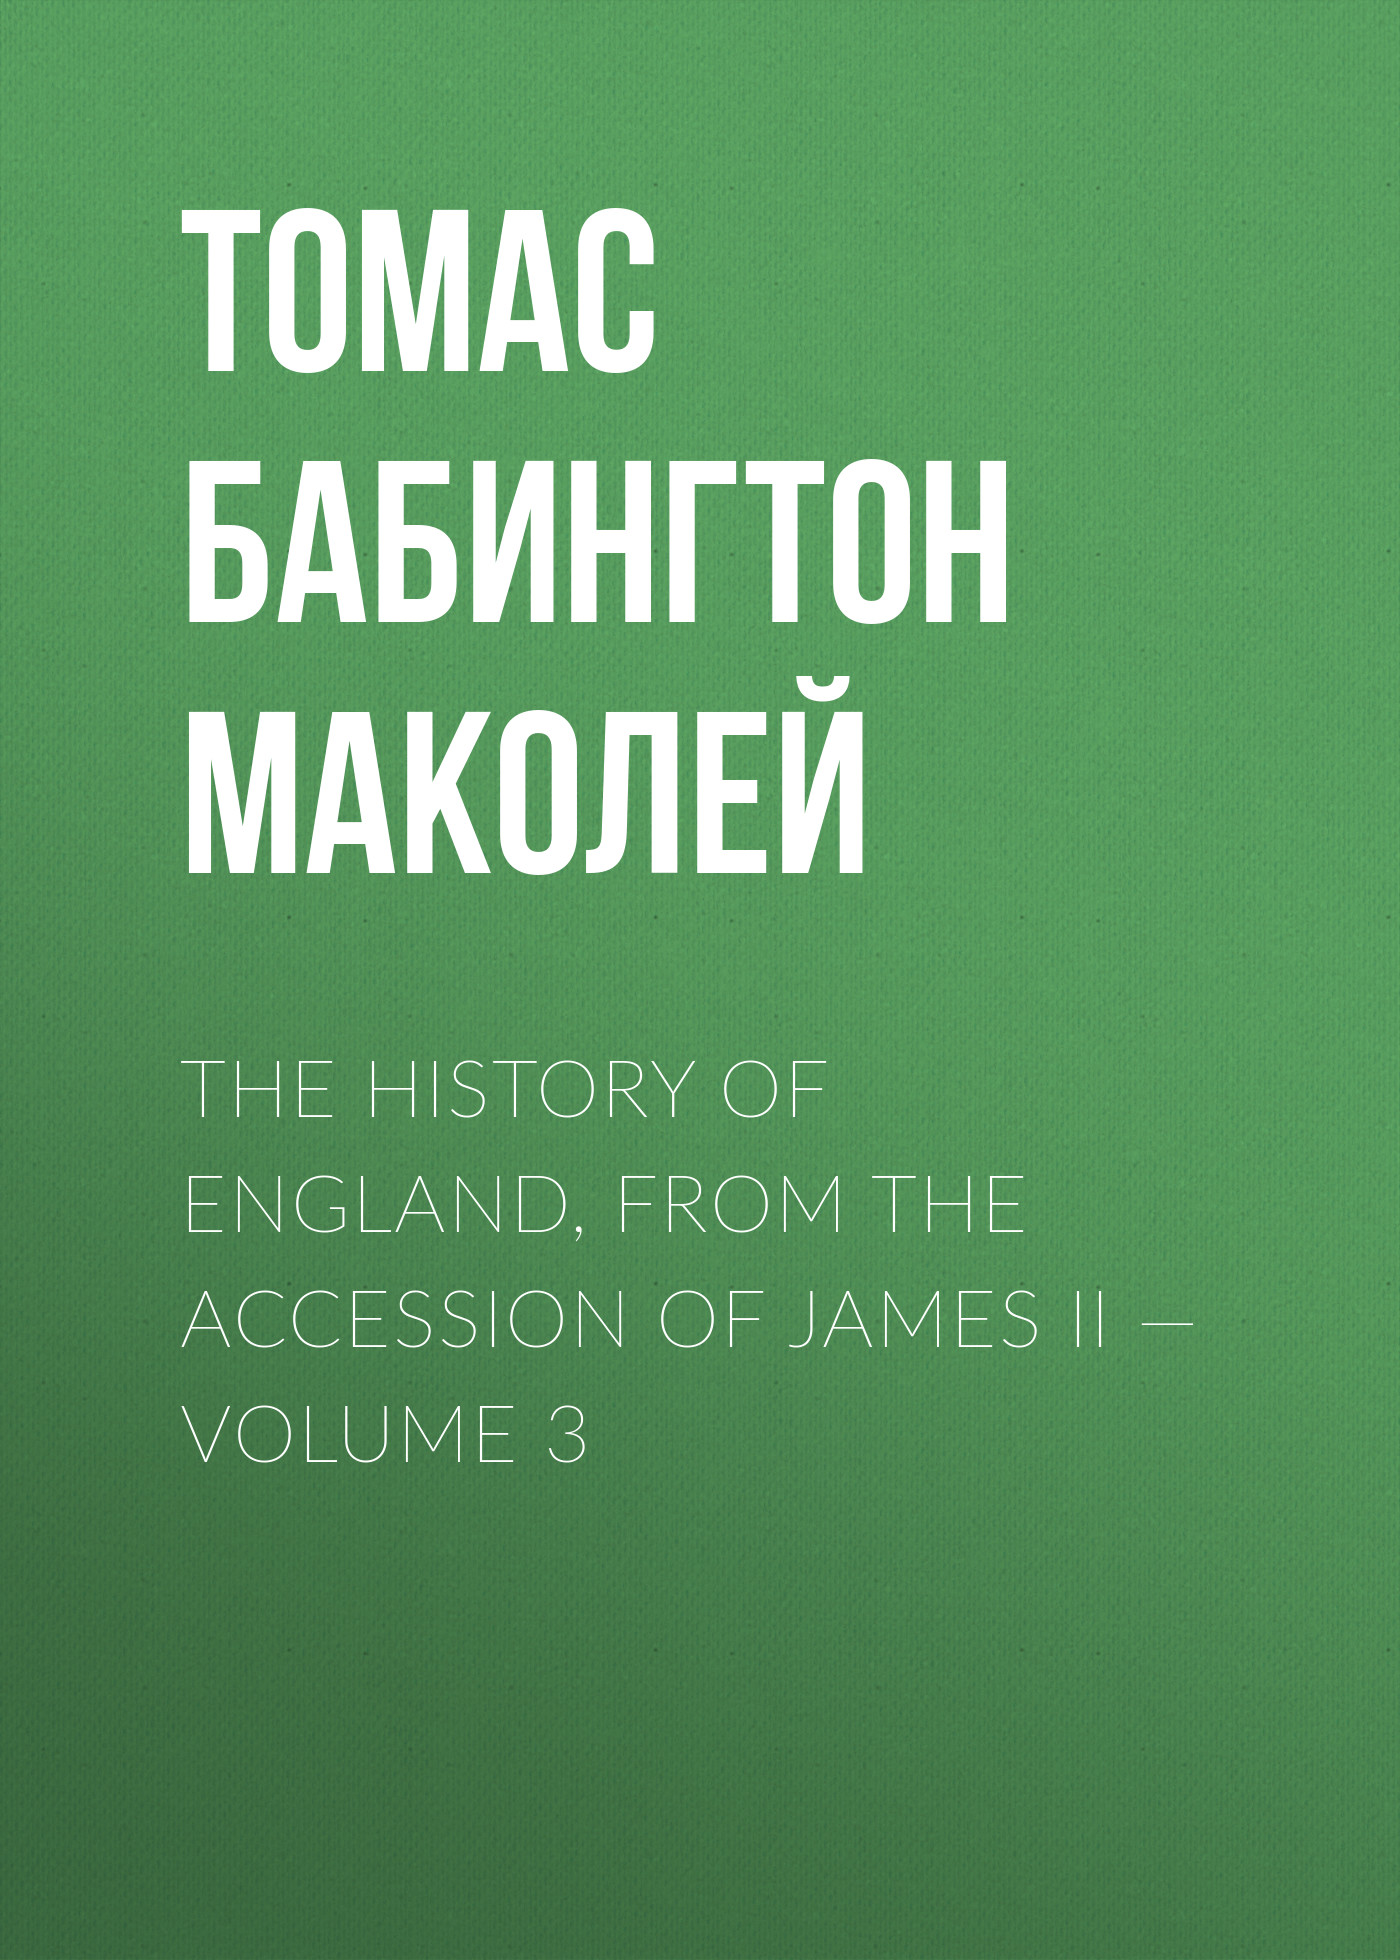 The History of England, from the Accession of James II— Volume 3